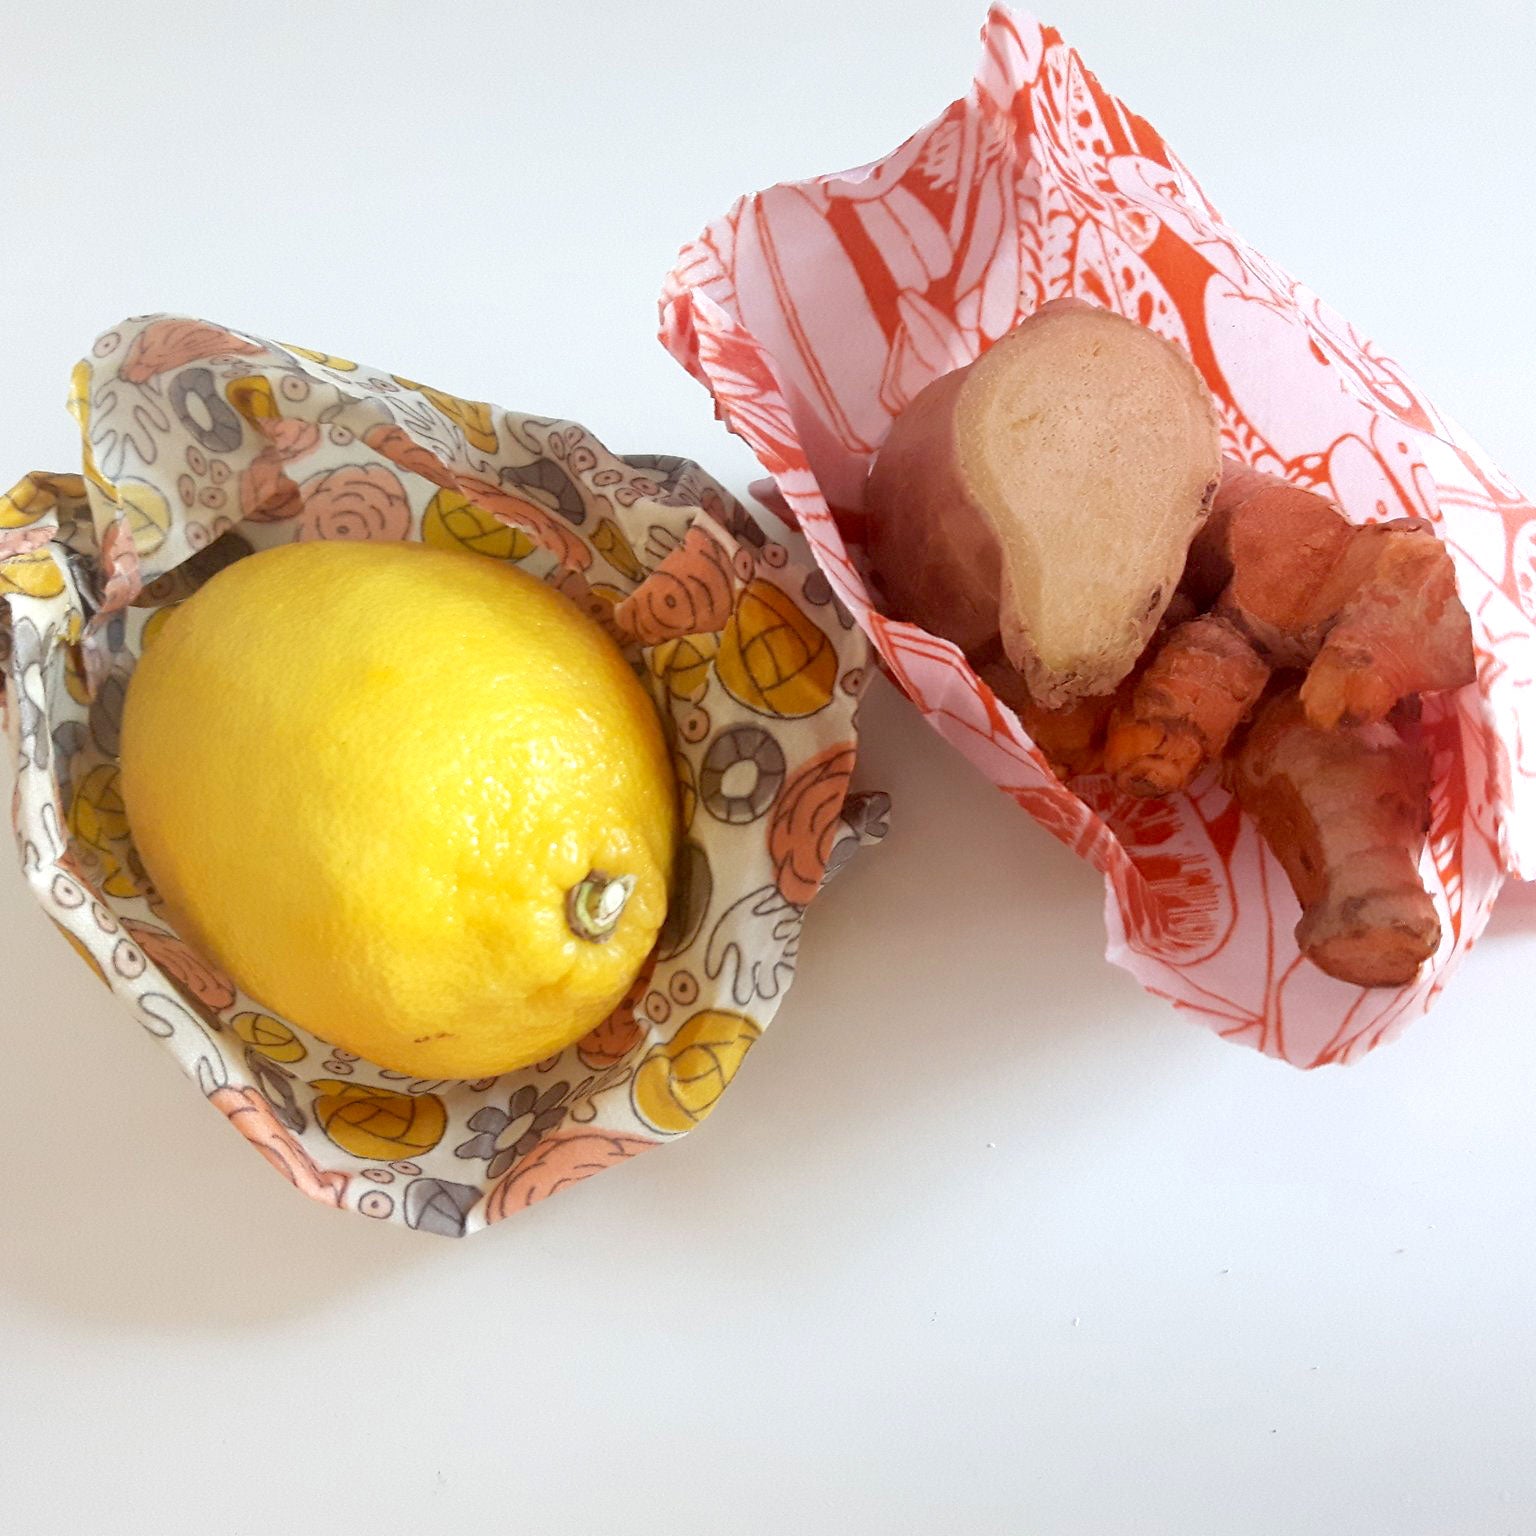 two snack size wax wraps, one holding a lemon, the other holding ginger root